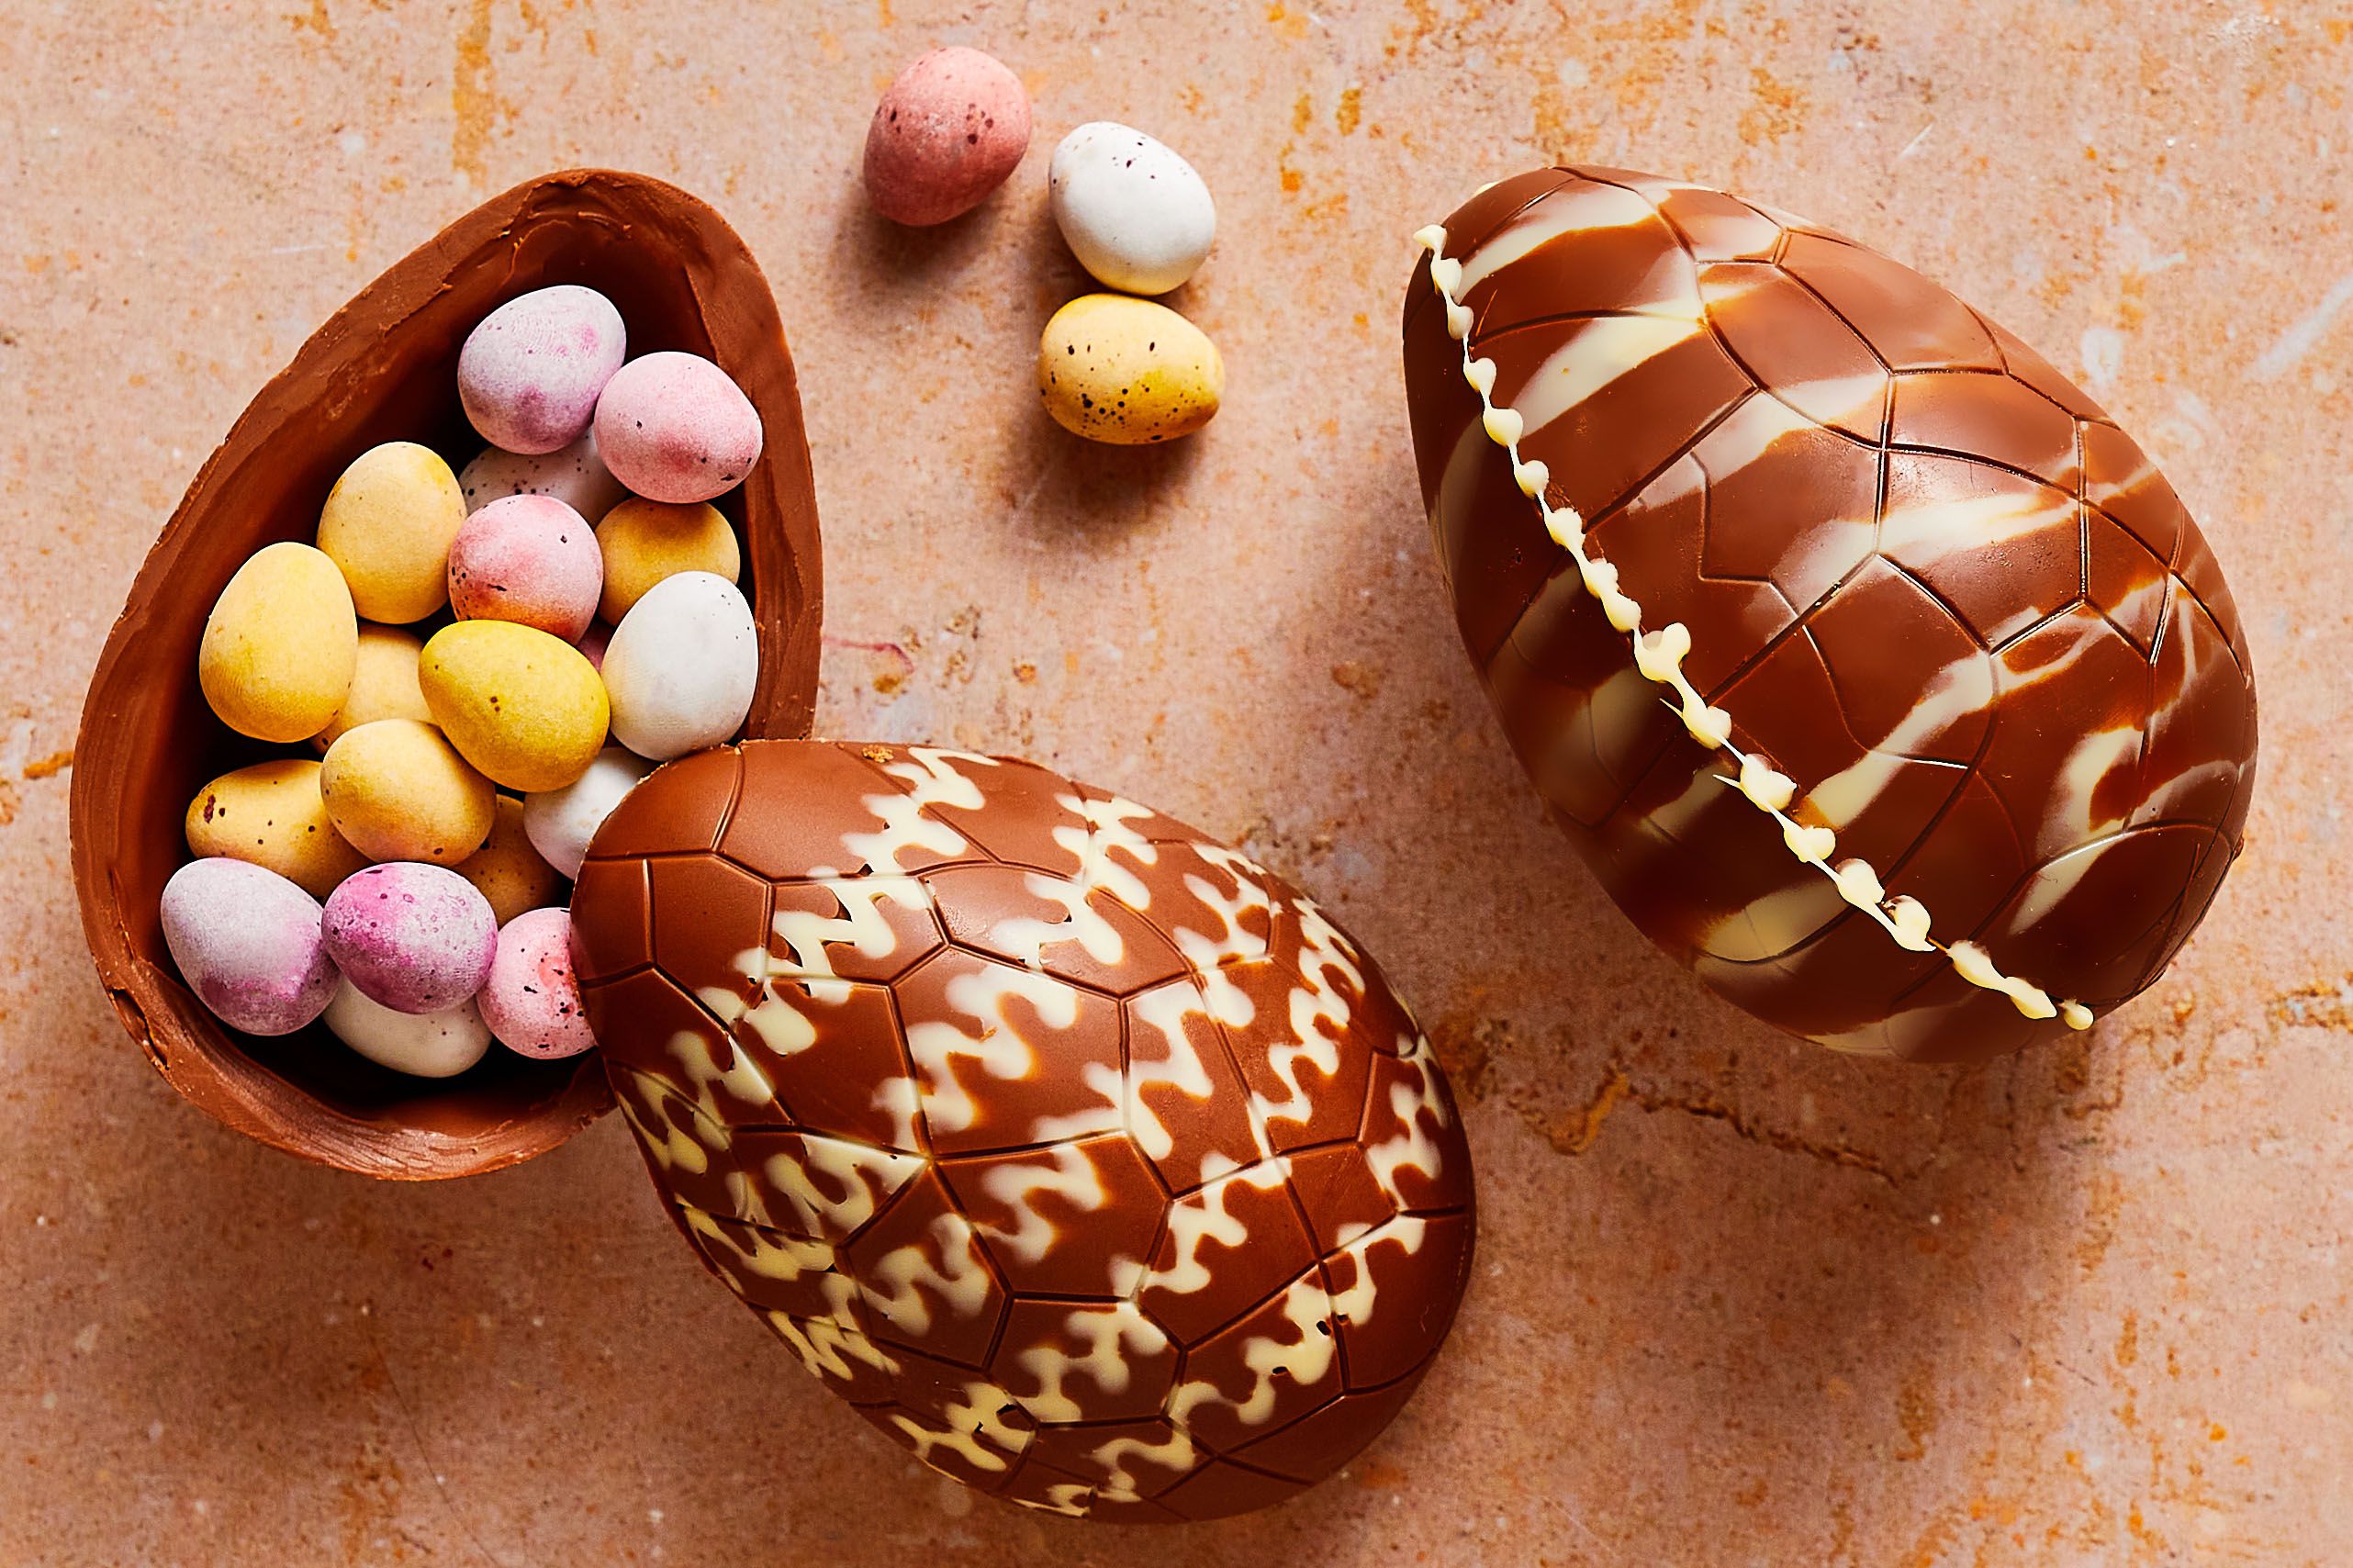 Make Your Easter Even Sweeter